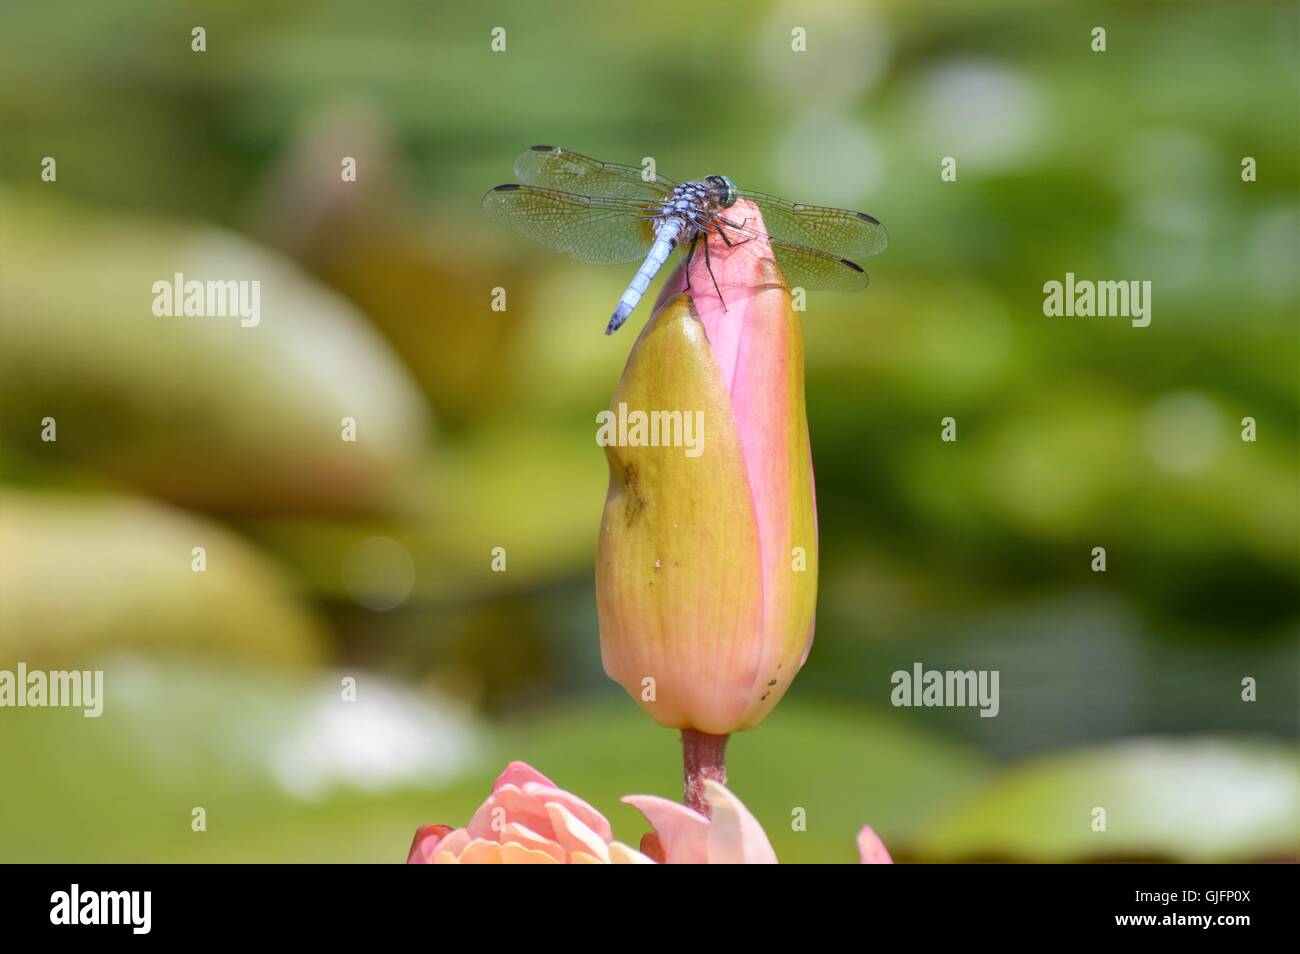 Dragonfly on a Water Lily Stock Photo